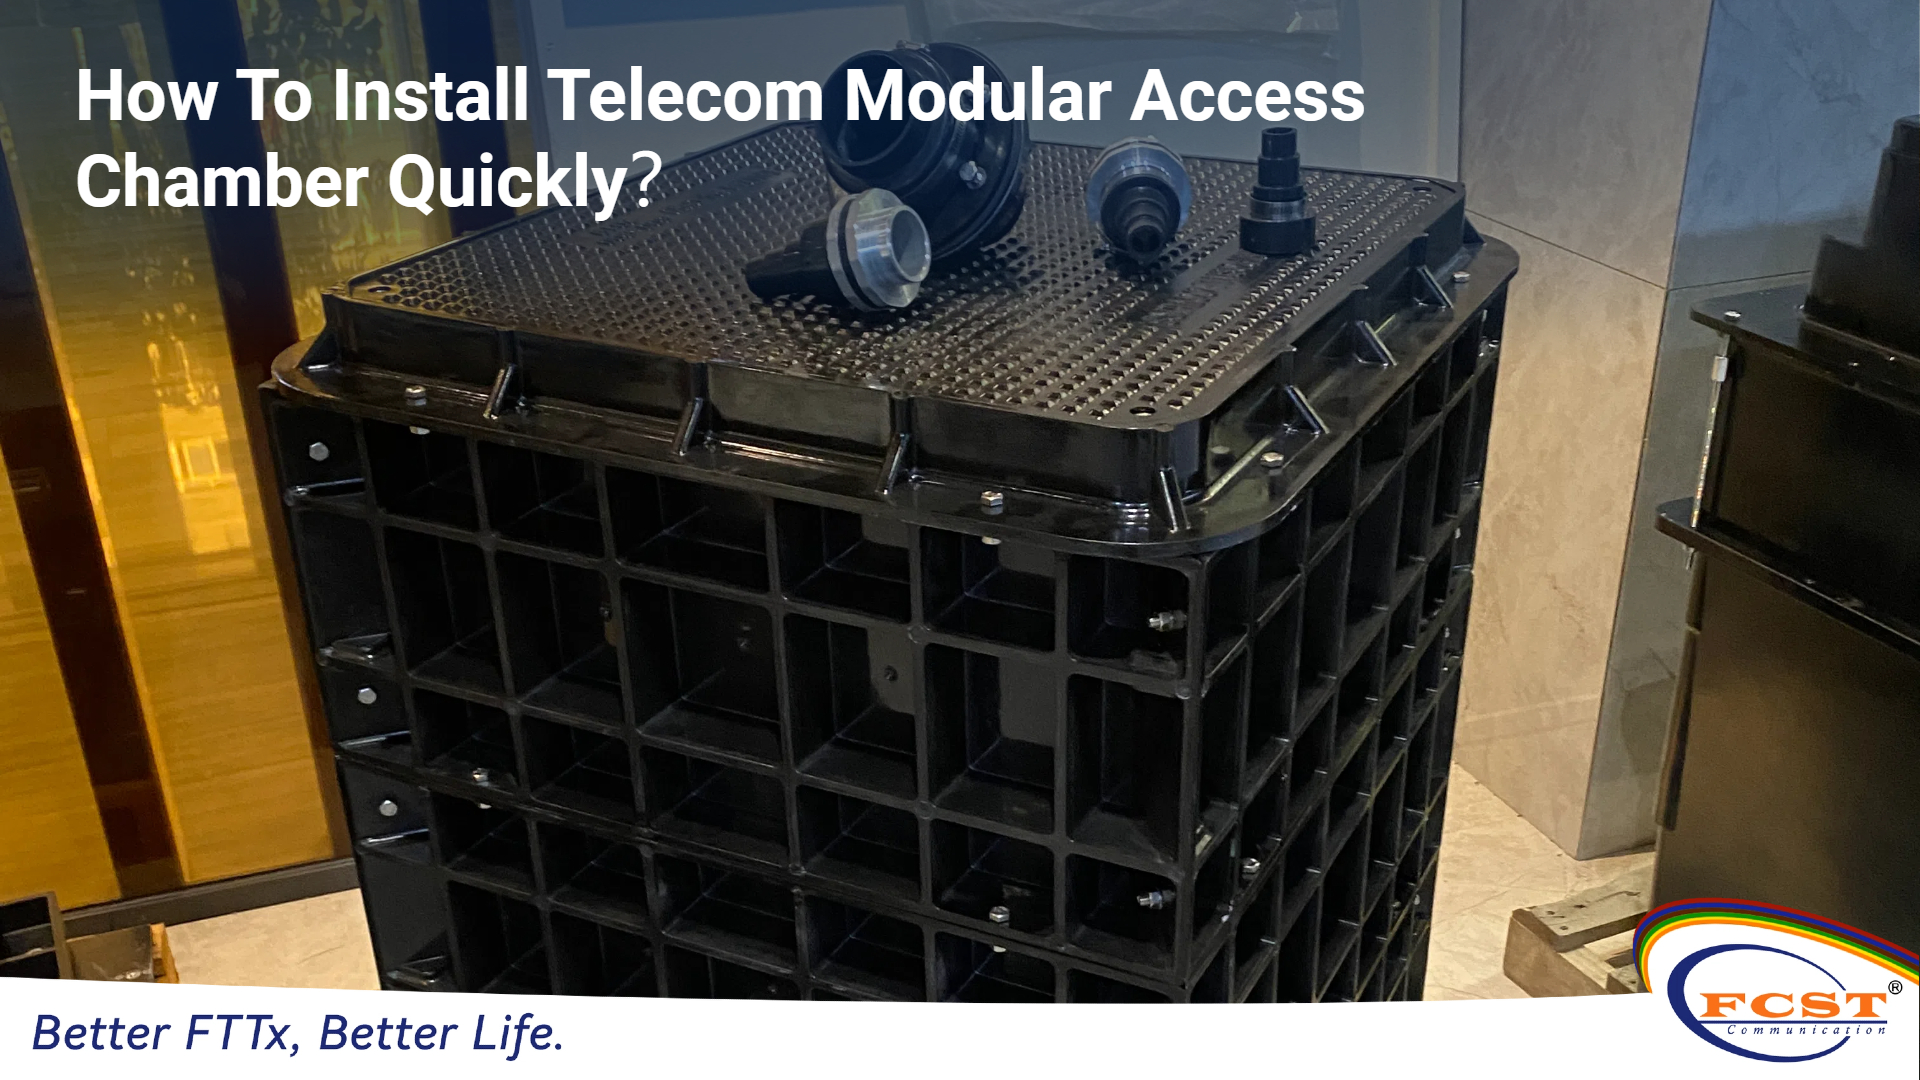 How To Install Telecom Modular Access Chamber Quickly？